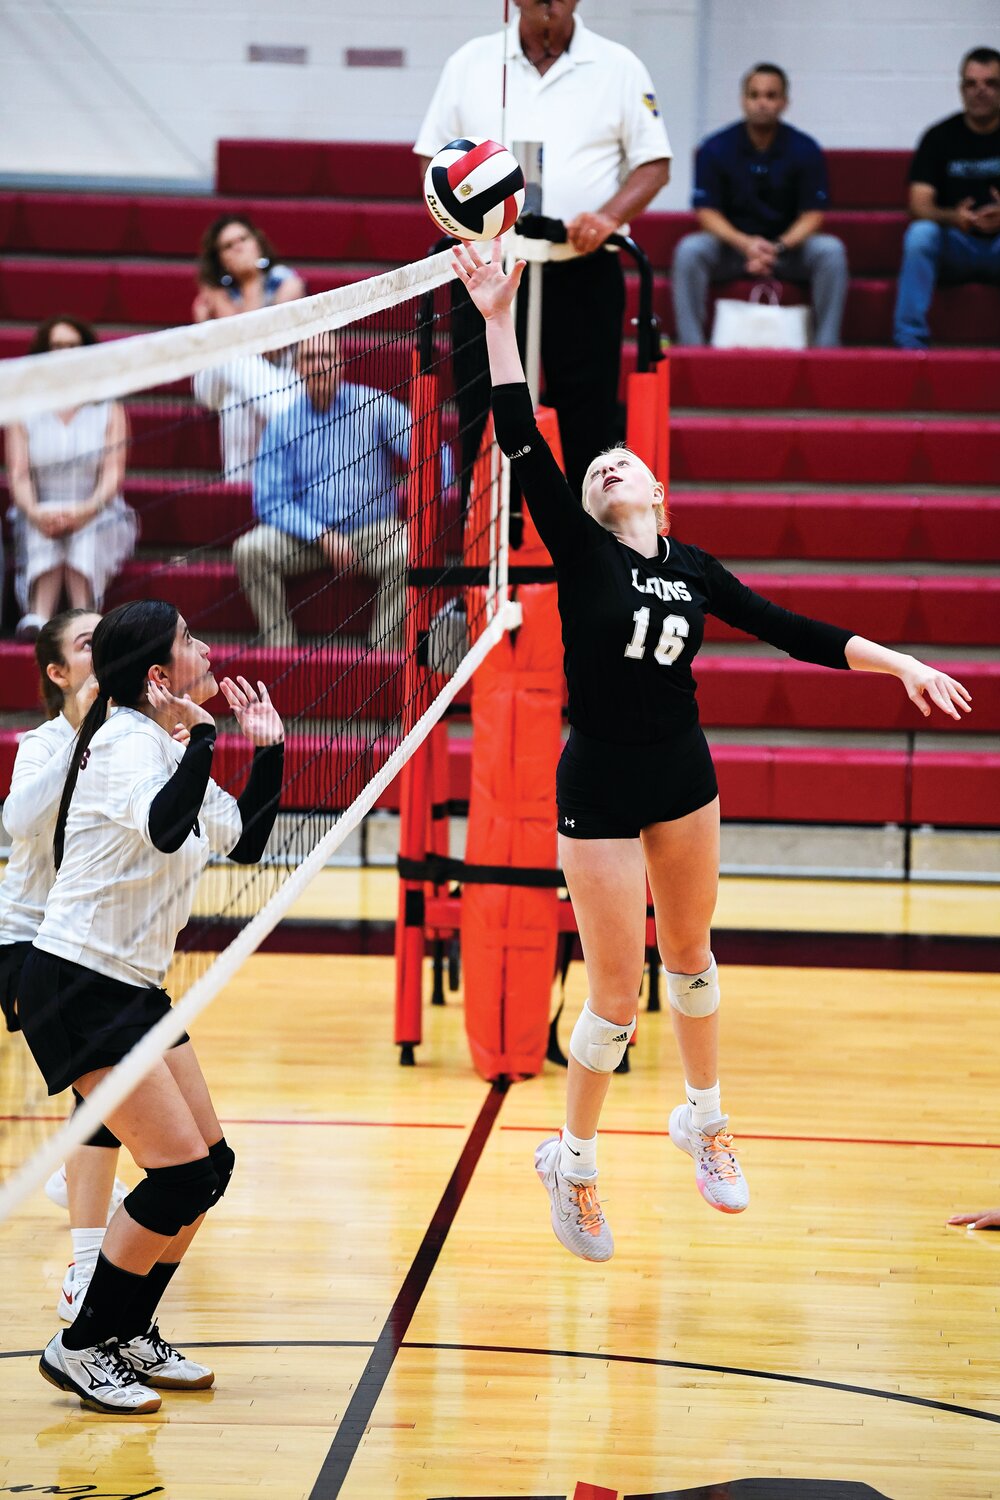 Faith Christian’s Aubrey Pringle just gets enough to tip the ball over for a point in the third match.